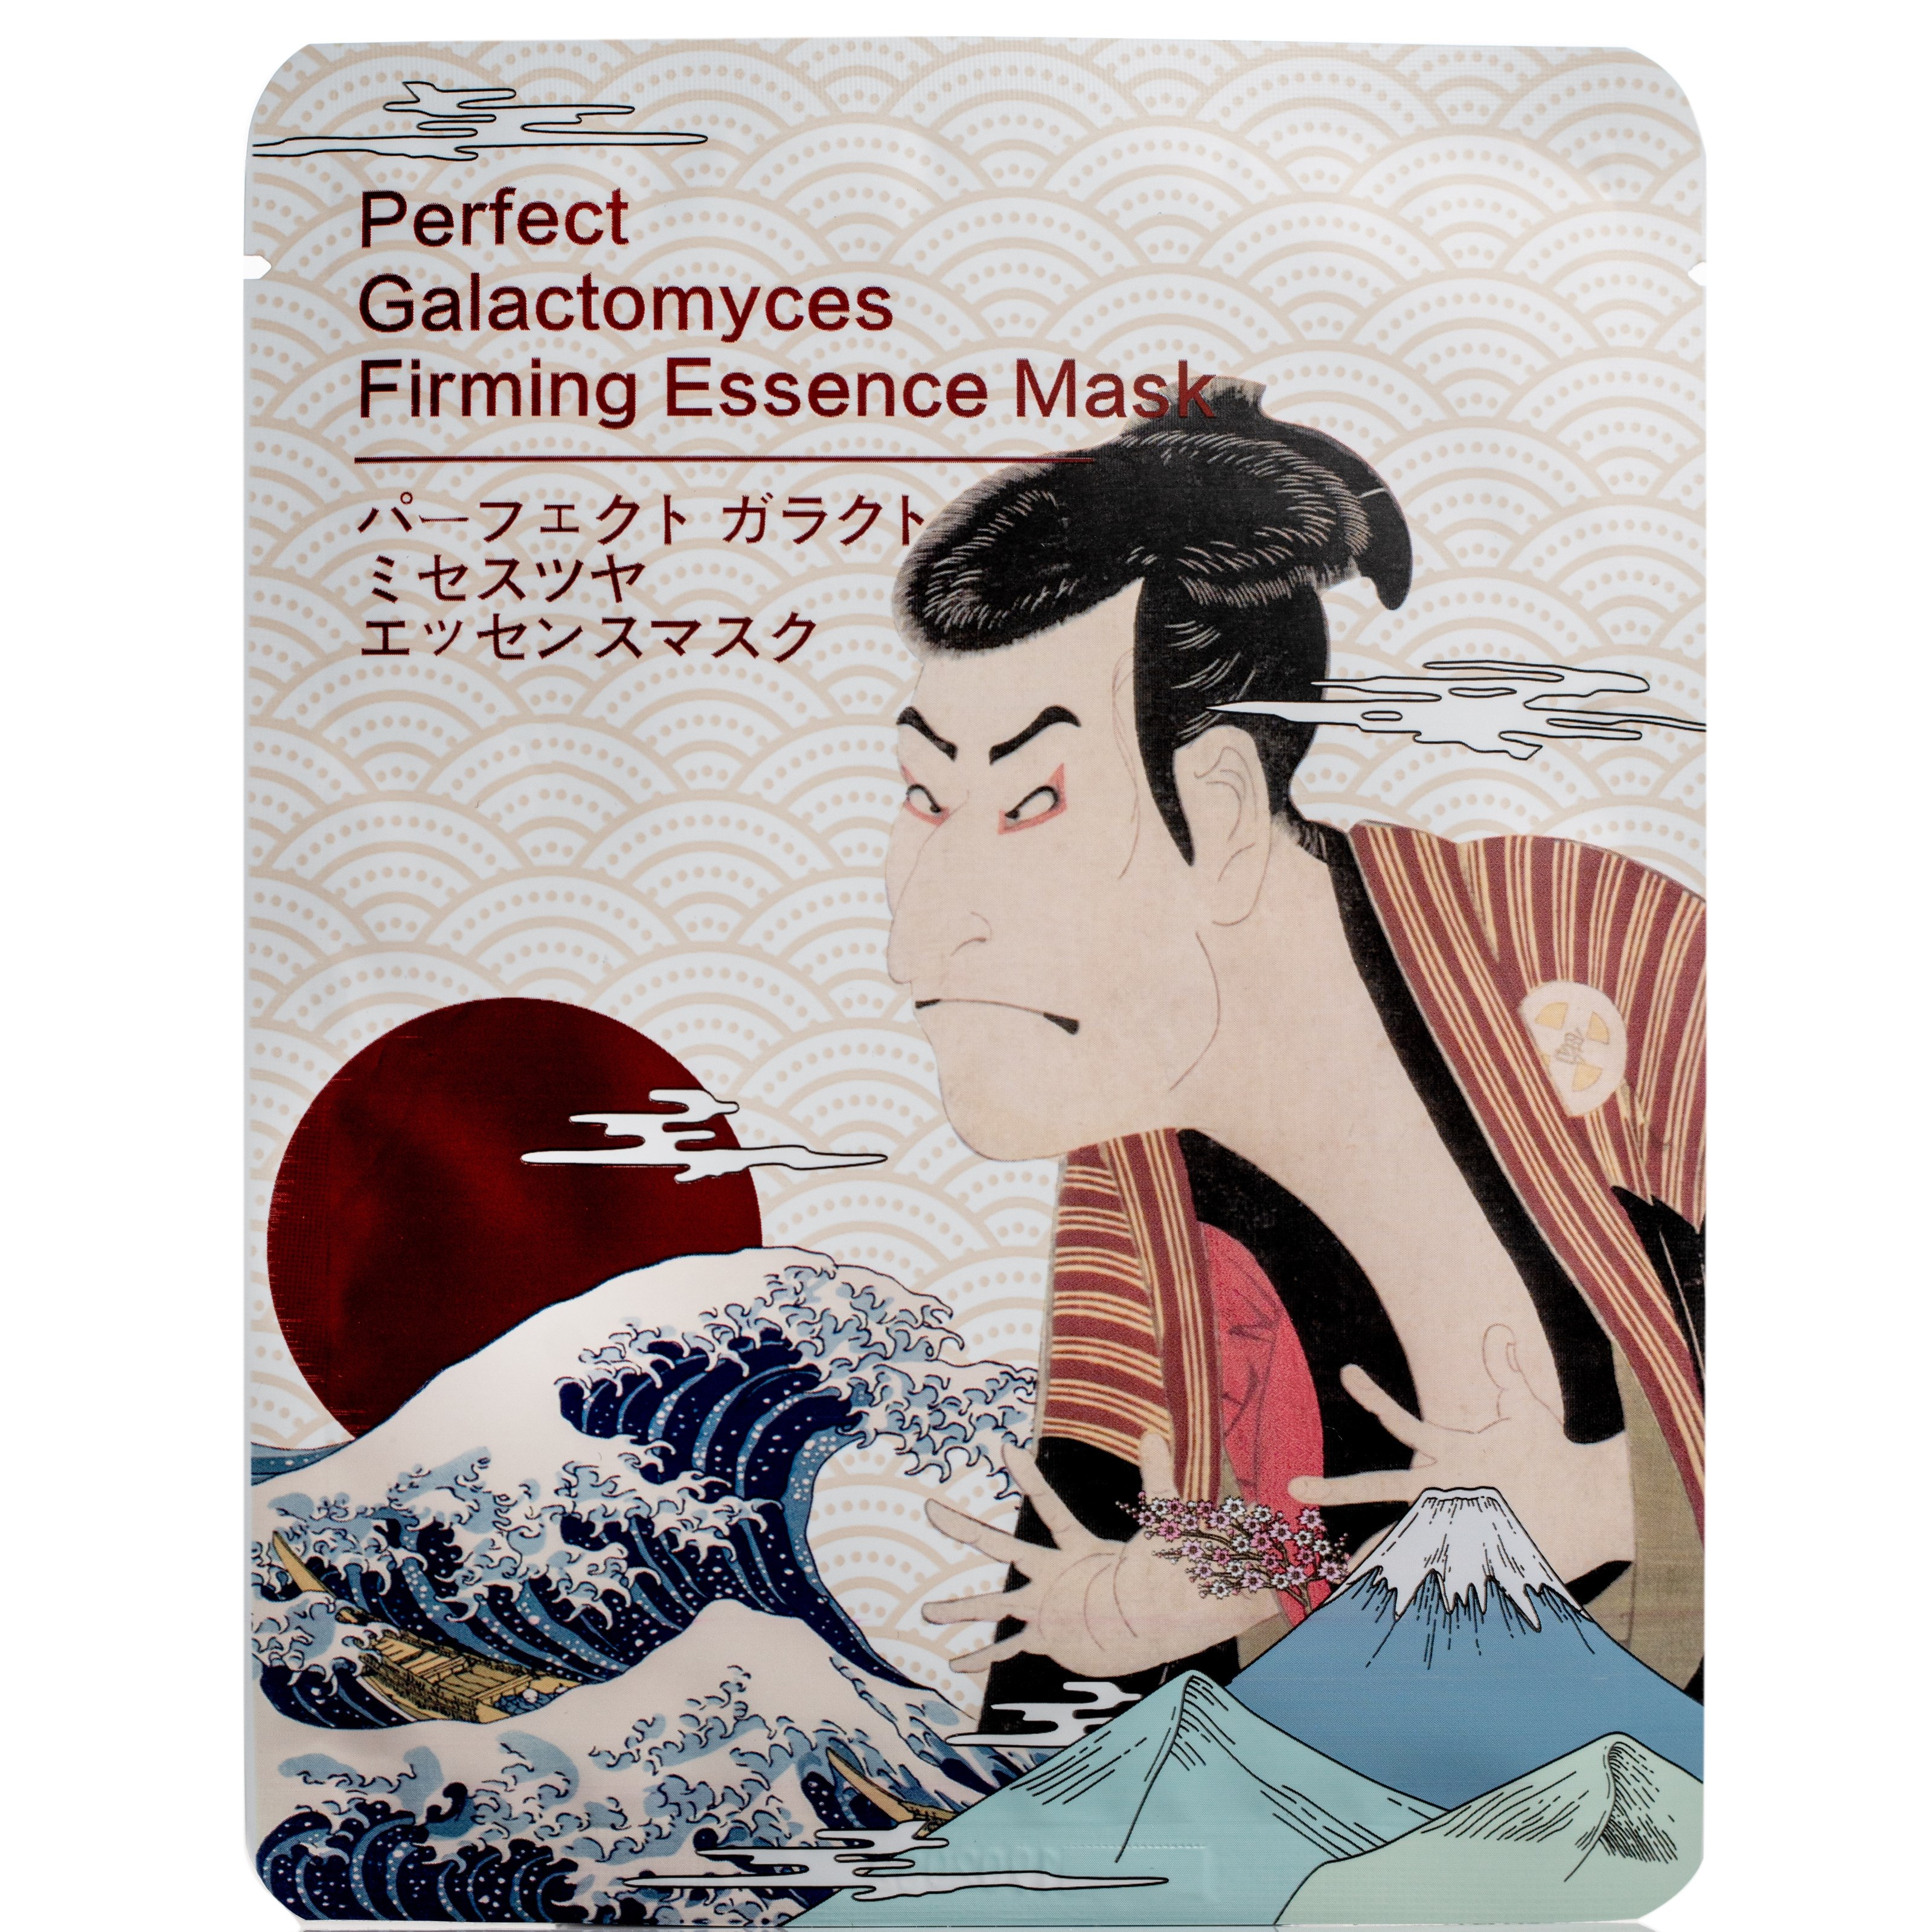 MITOMO Perfect Galactomyces Firming Essence Mask